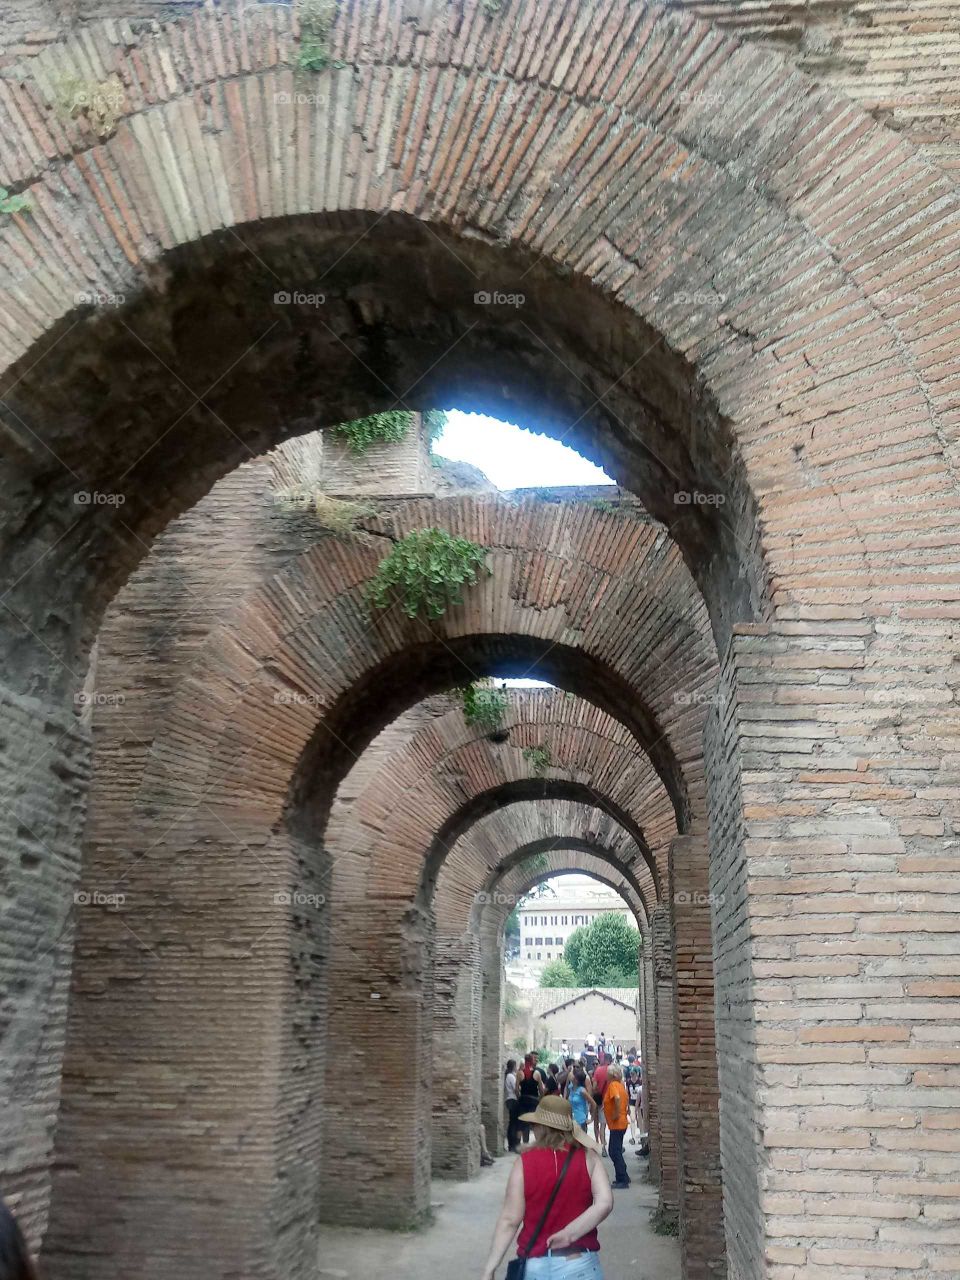 Ancient arches